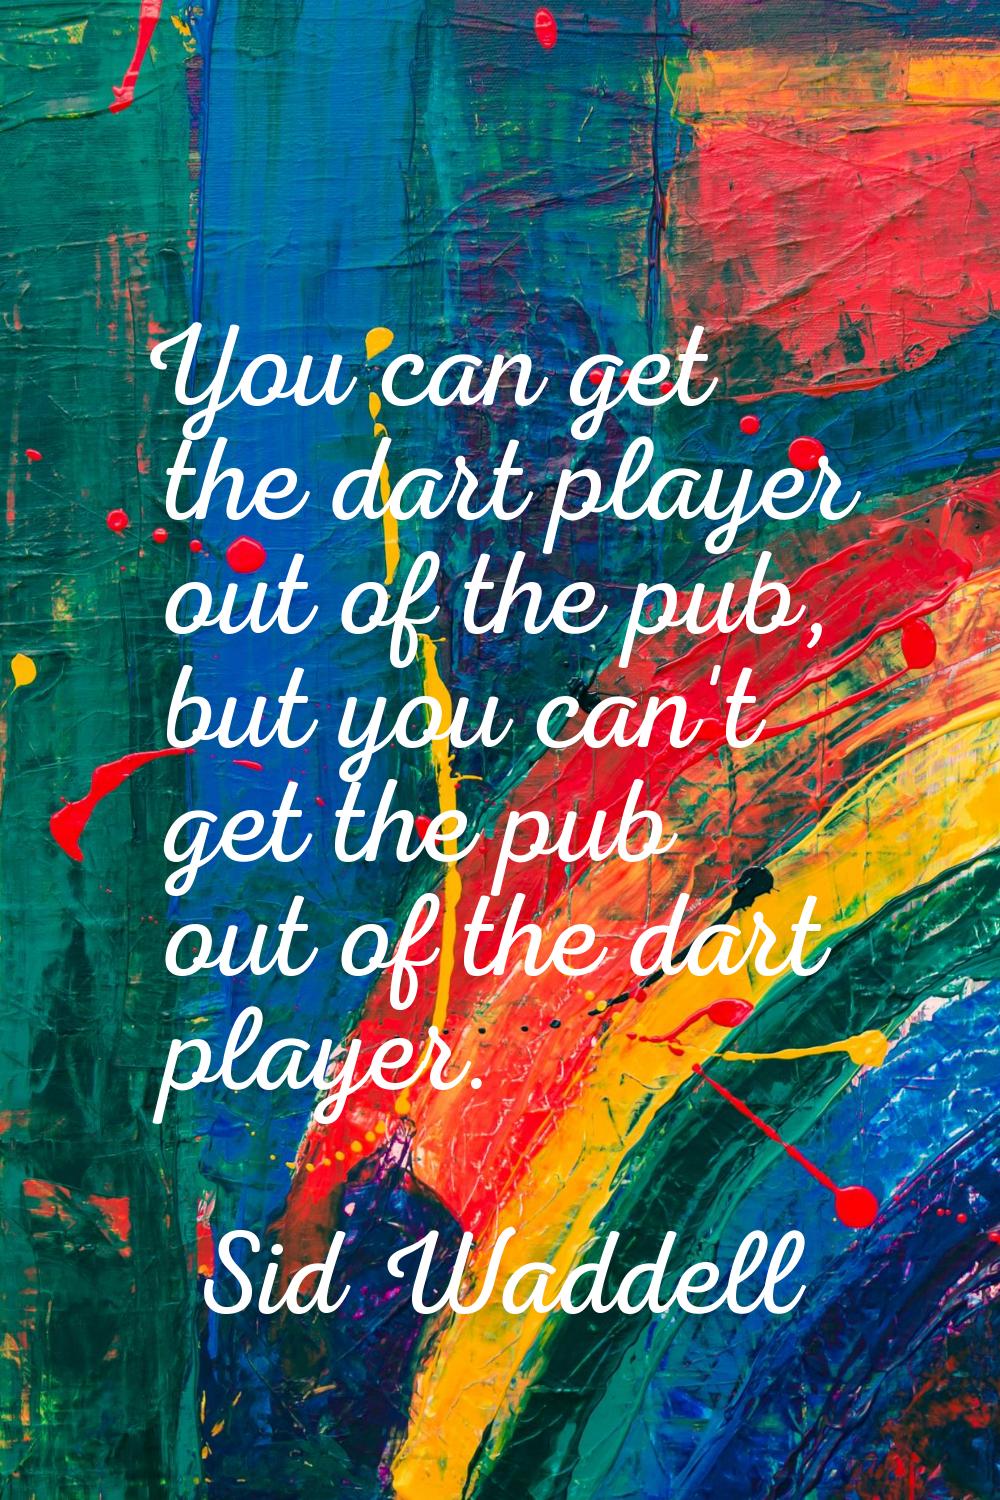 You can get the dart player out of the pub, but you can't get the pub out of the dart player.